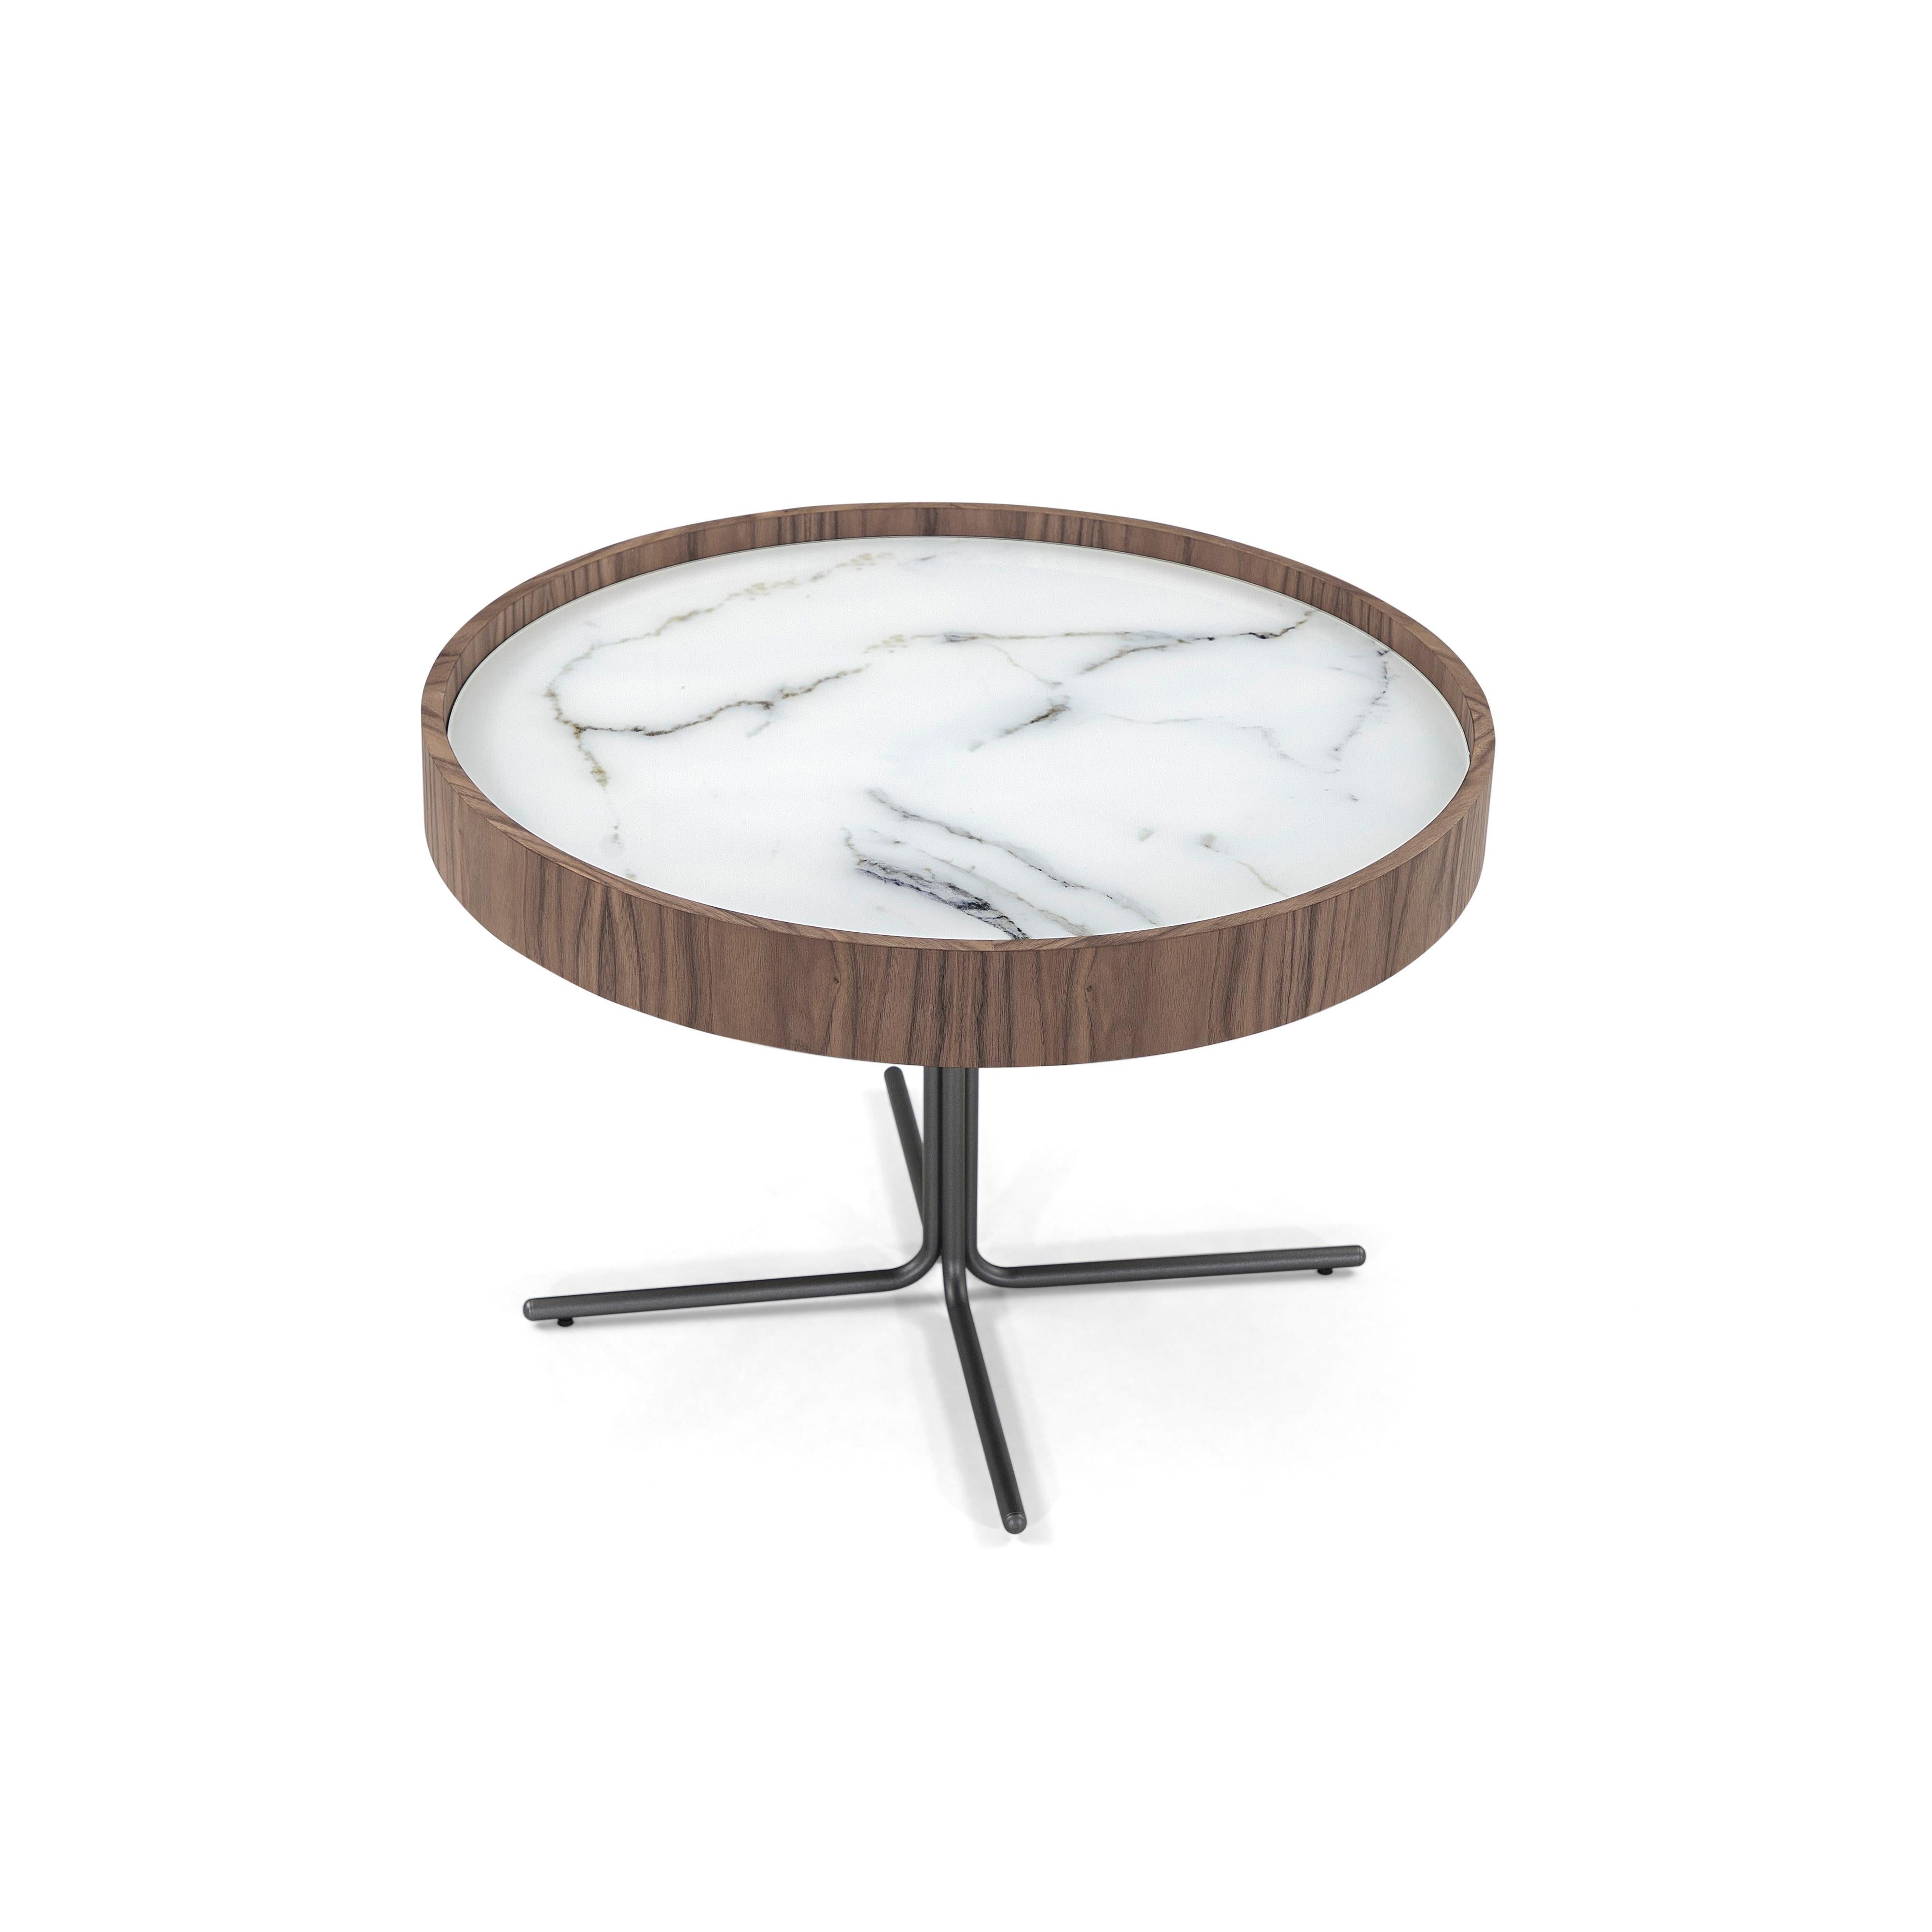 Veneer Regia Occasional Table in Walnut Wood Finish Featuring White Glass 26'' For Sale